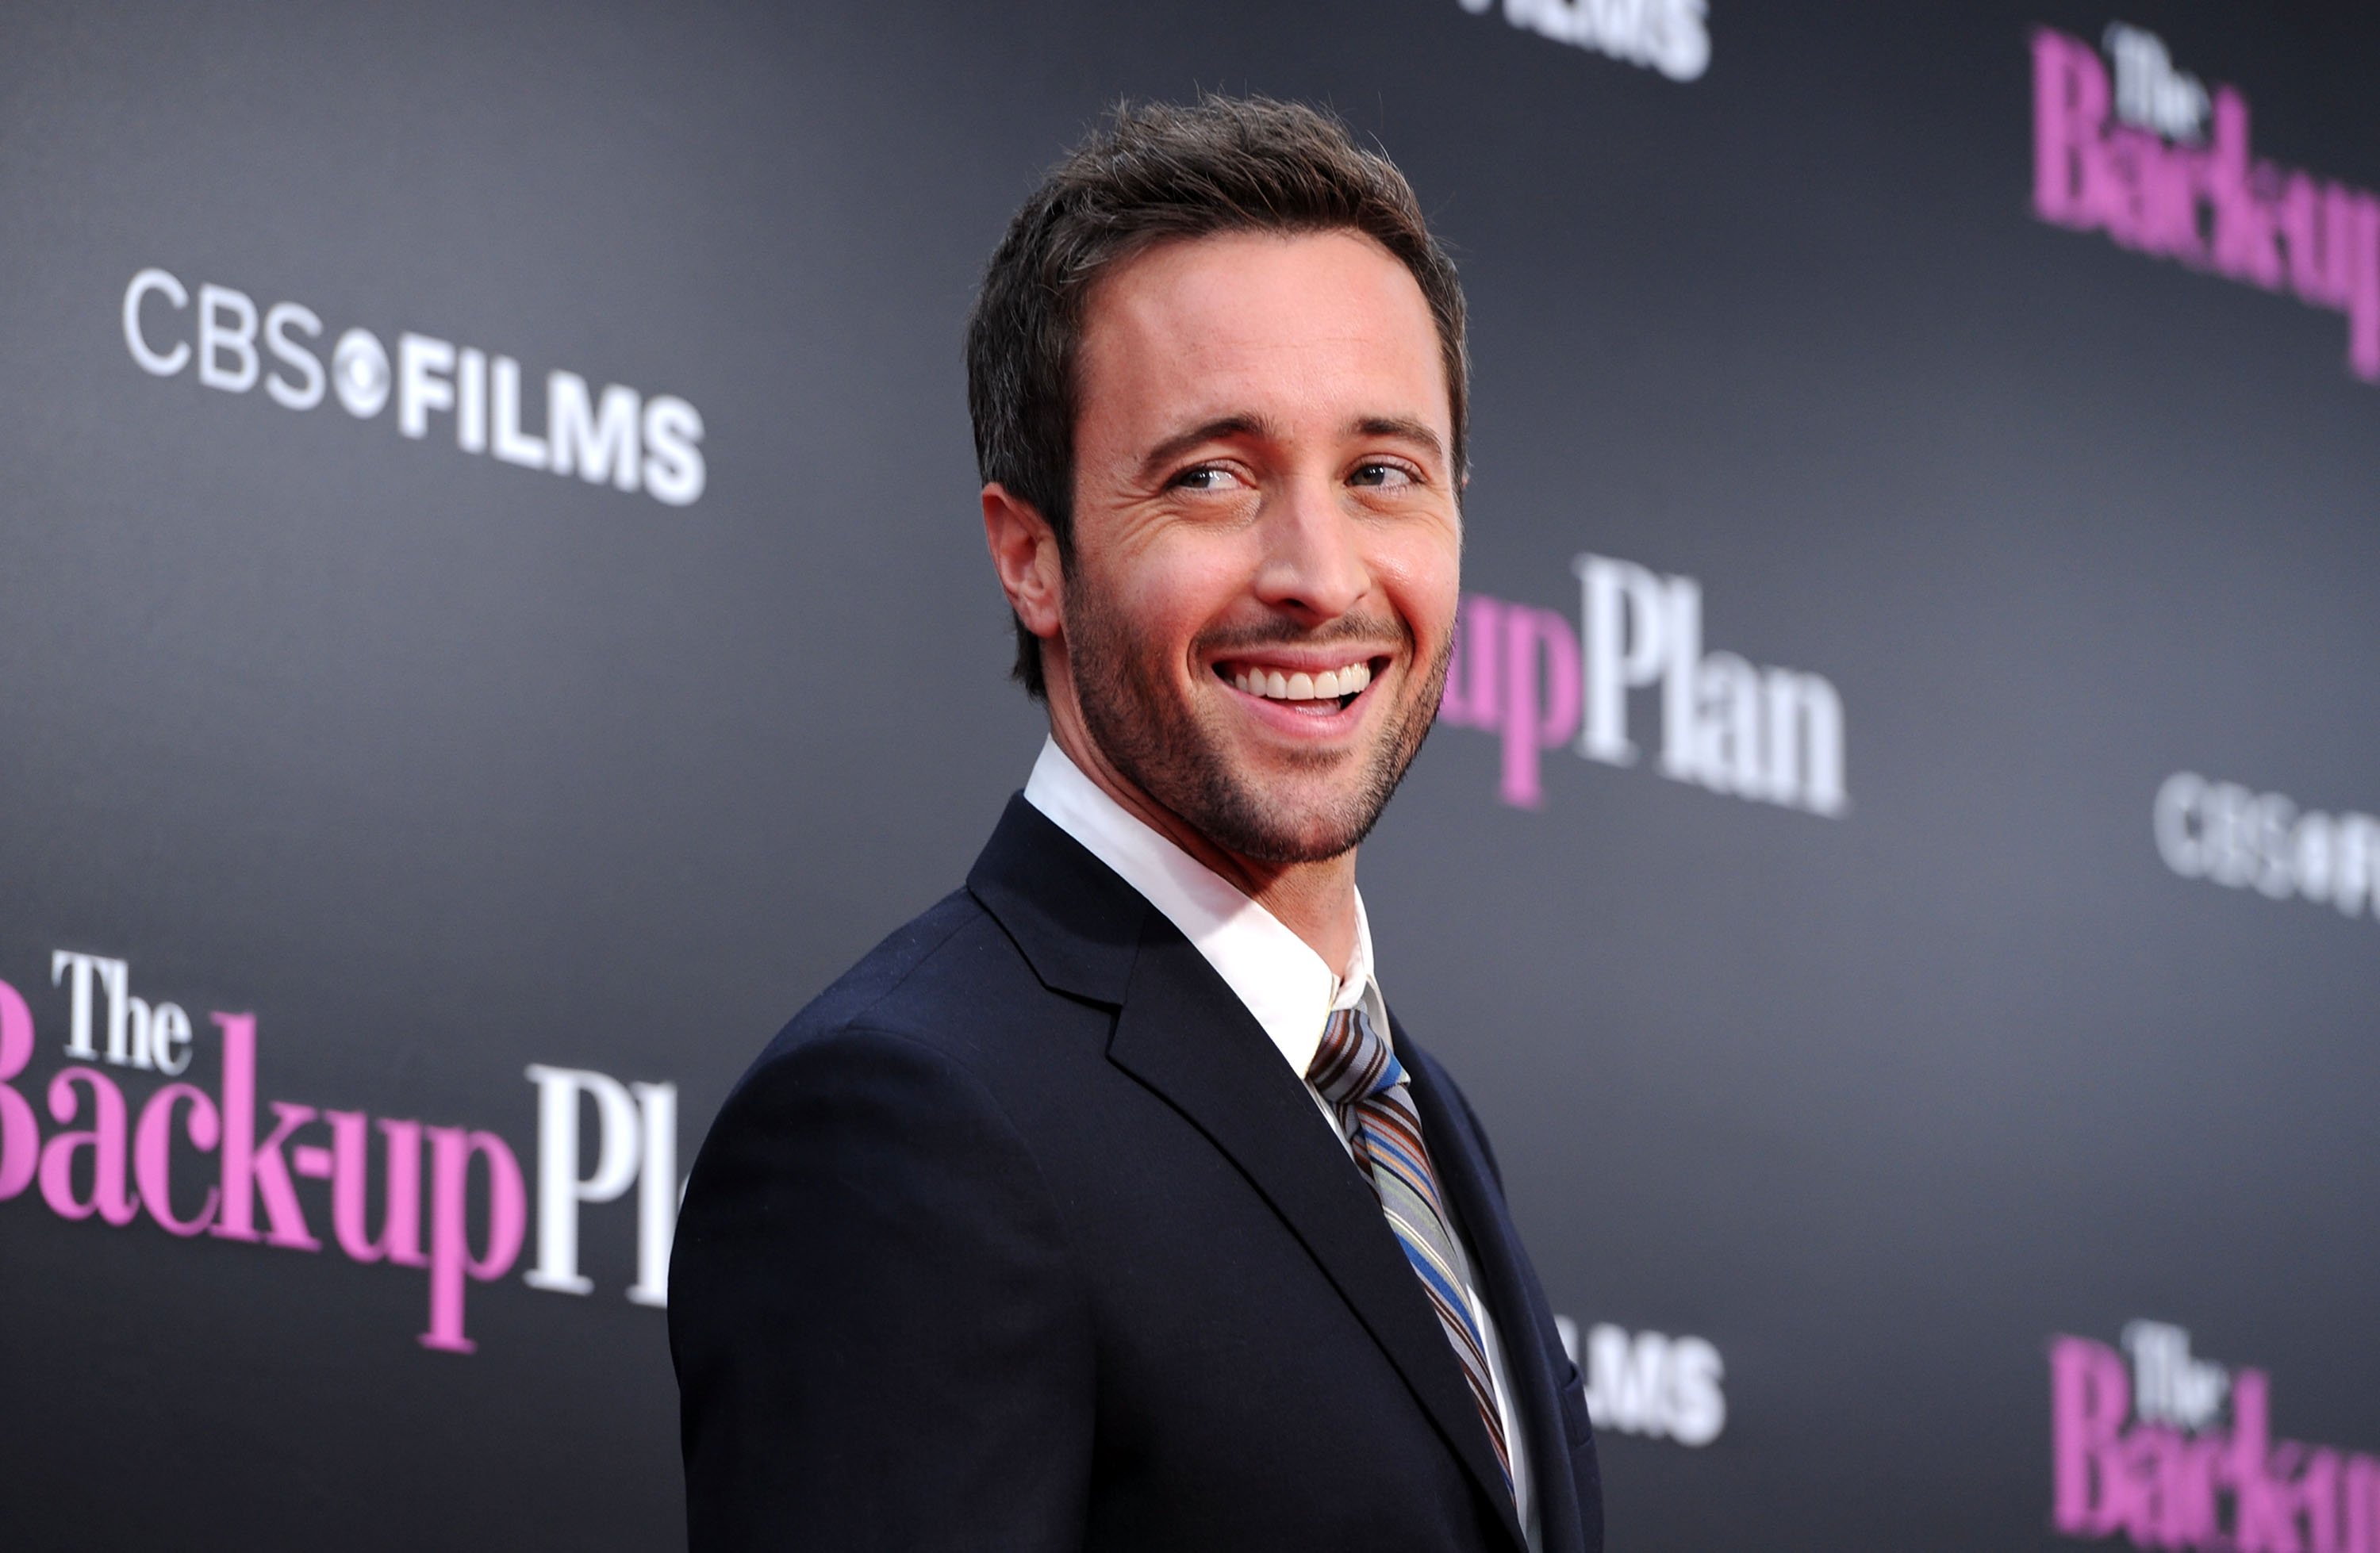 Alex O’Loughlin at the premier of CBS’s “The Back-up Plan” on April 21, 2010 | Source: Getty Images